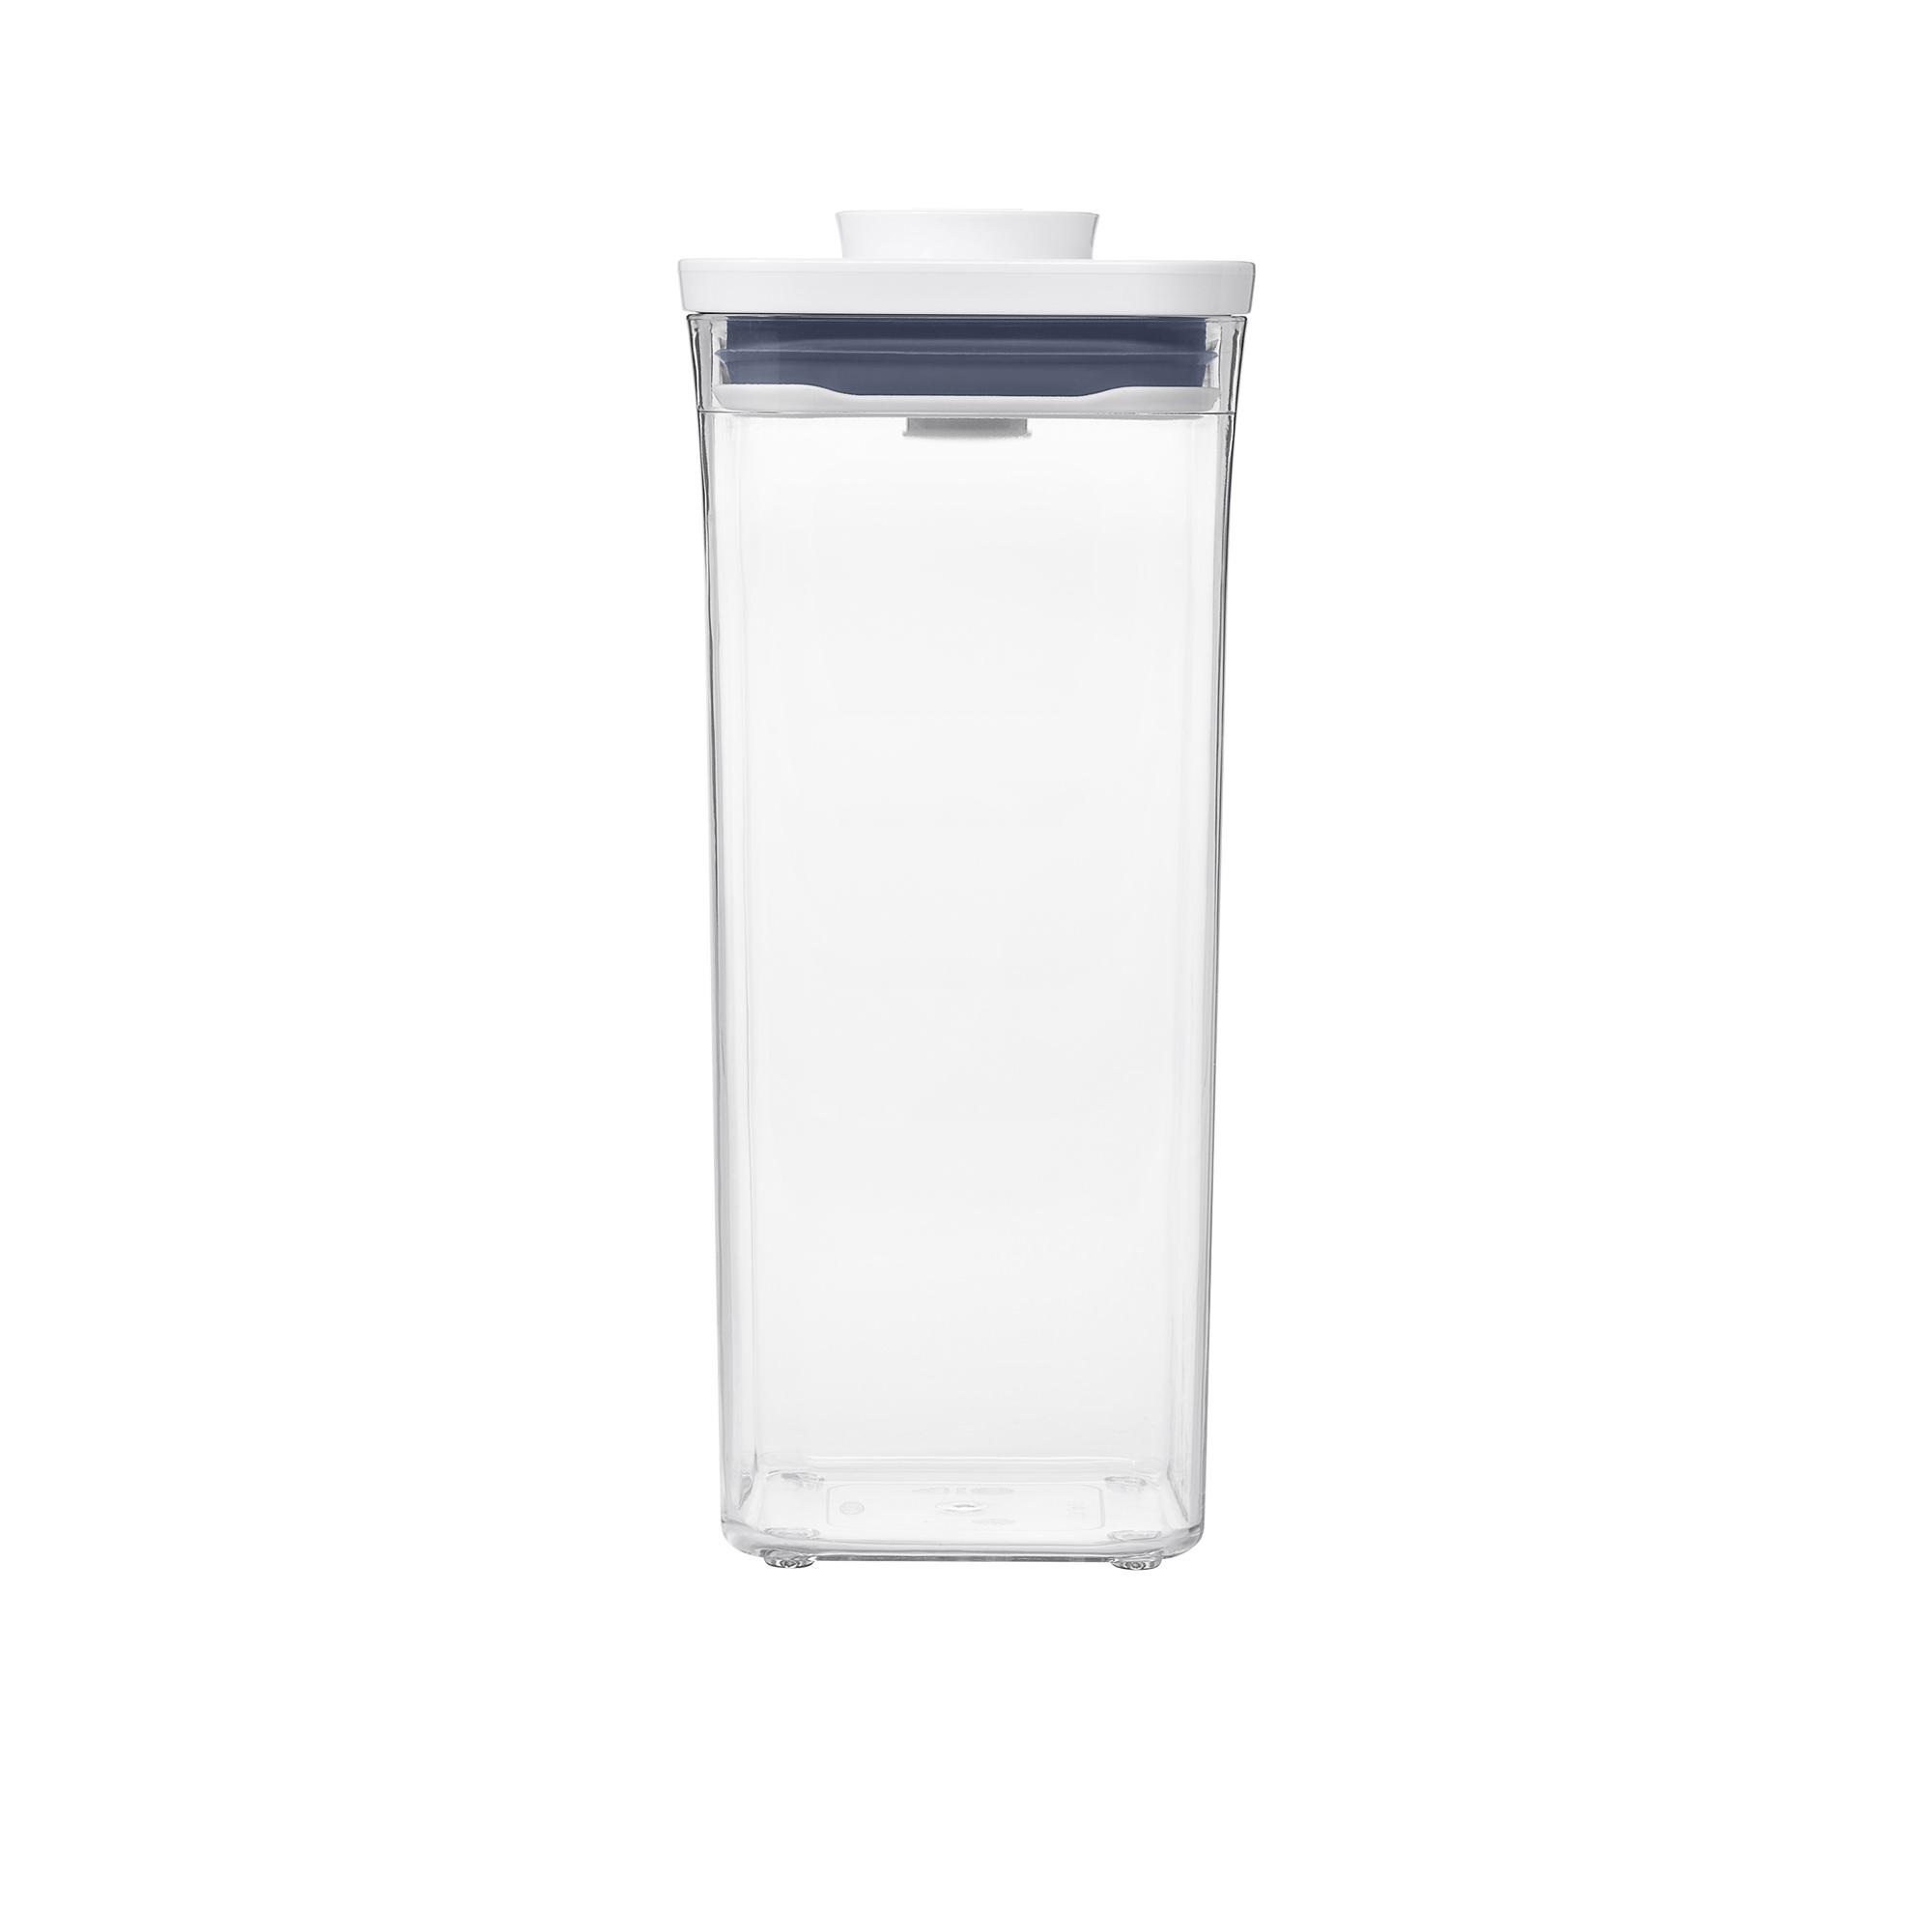 OXO Good Grips Square Pop 2.0 Container 1.6L Image 1